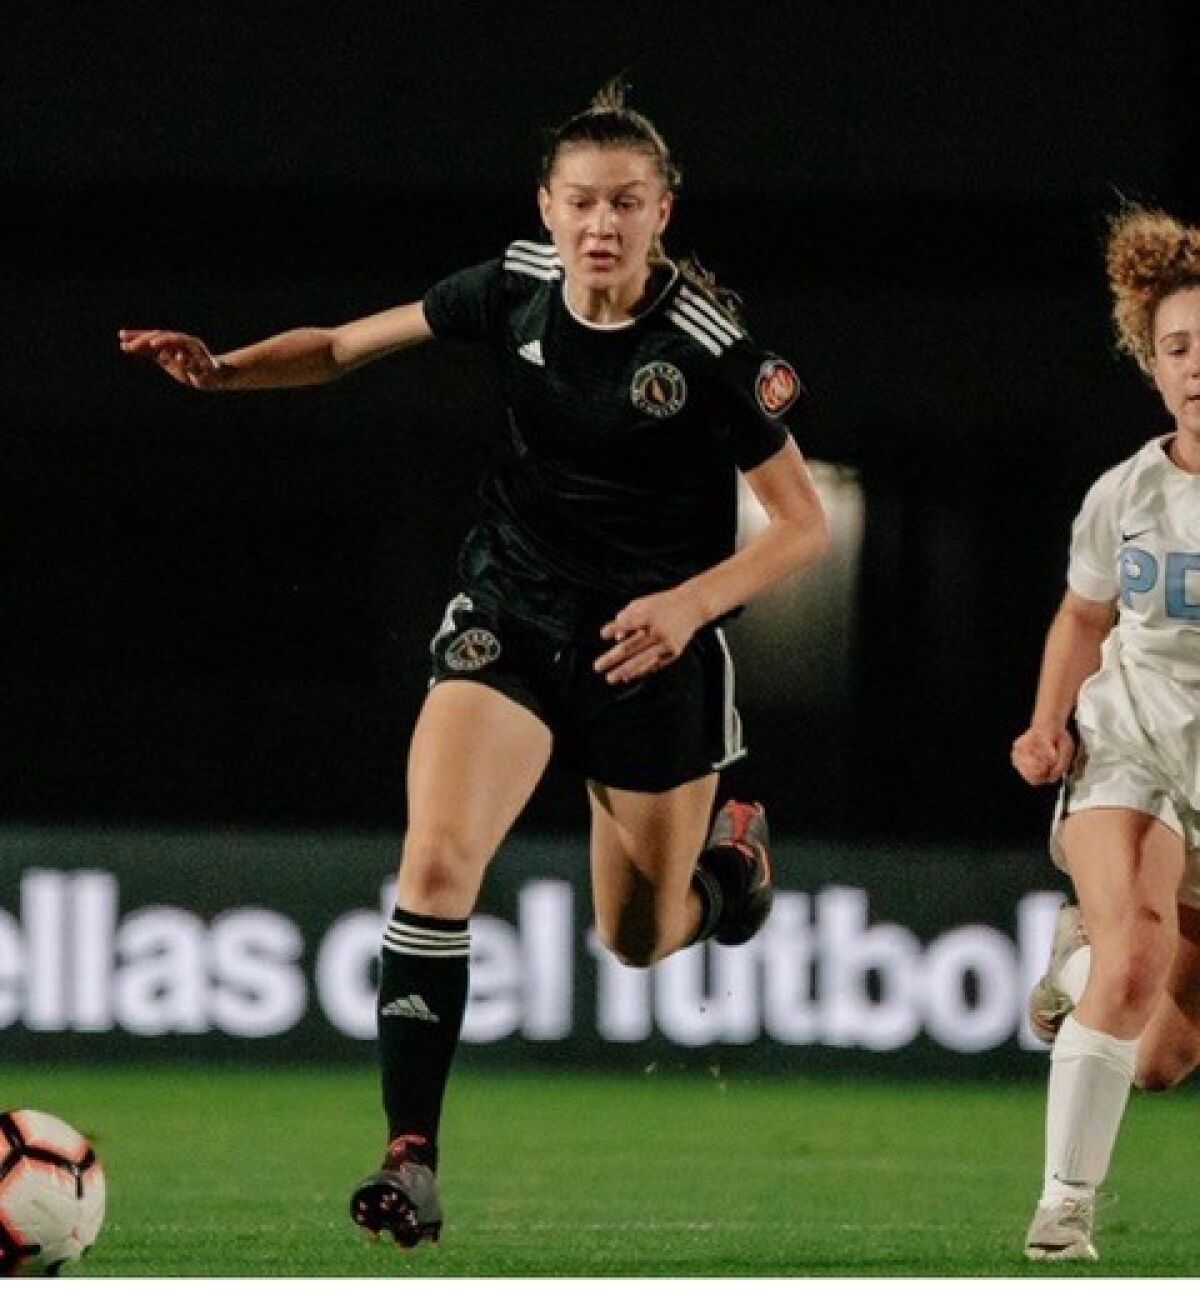 Emma James competes for the 2005 LAFC Slammers team playing in the International Champions Cup in Florida in December.